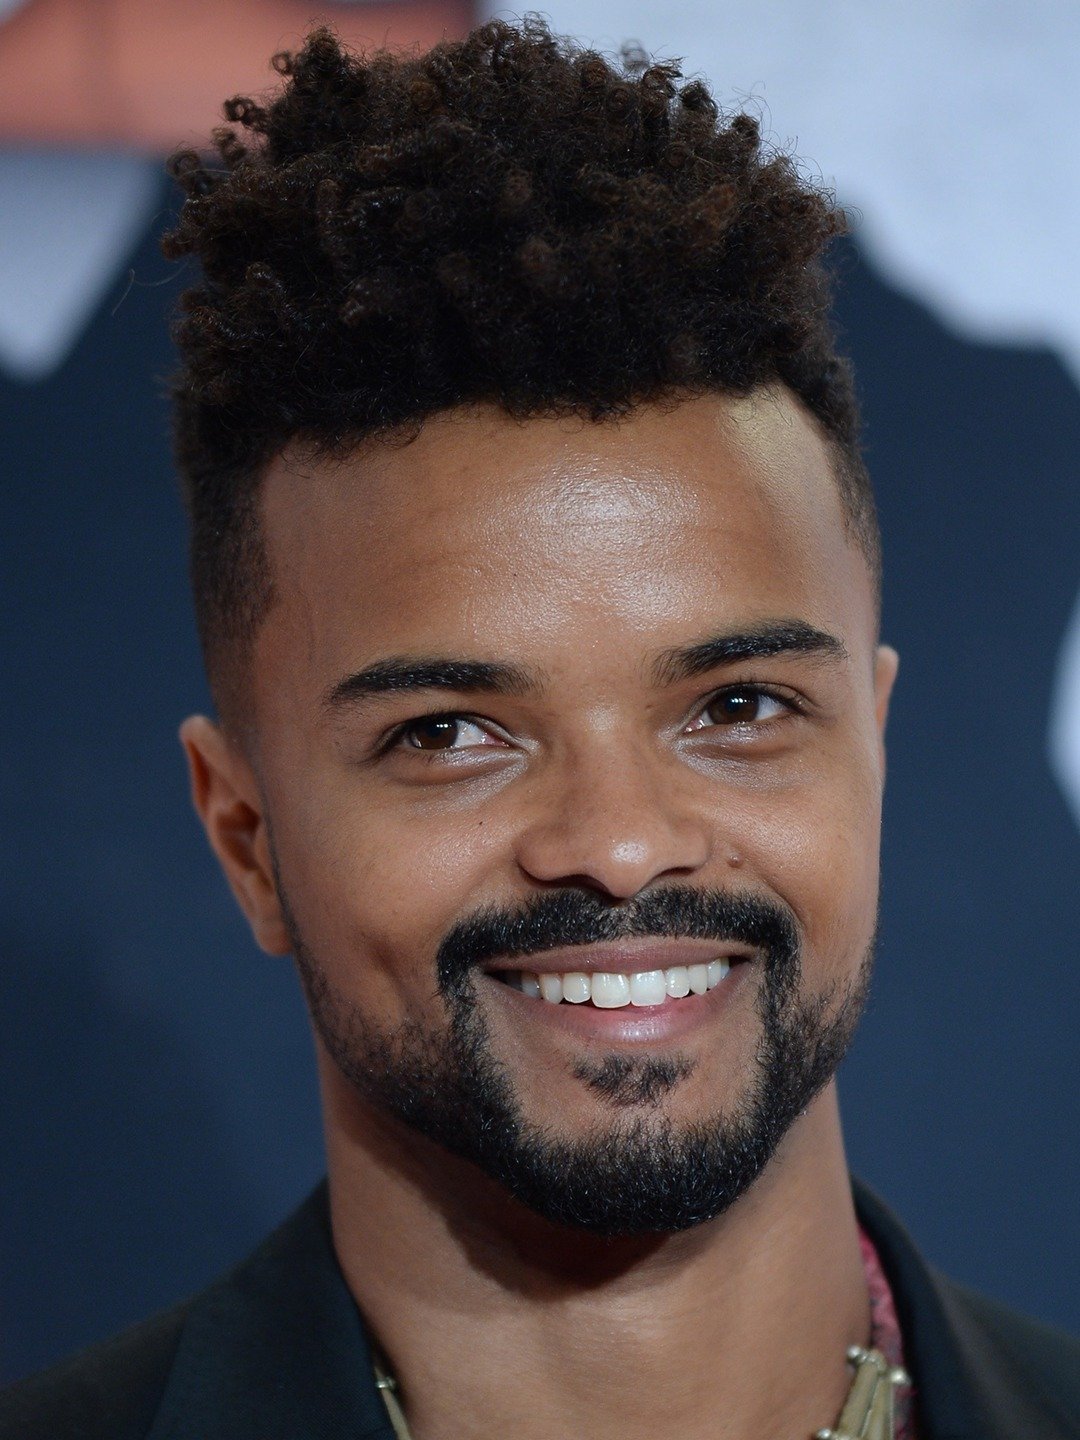 How tall is Eka Darville?